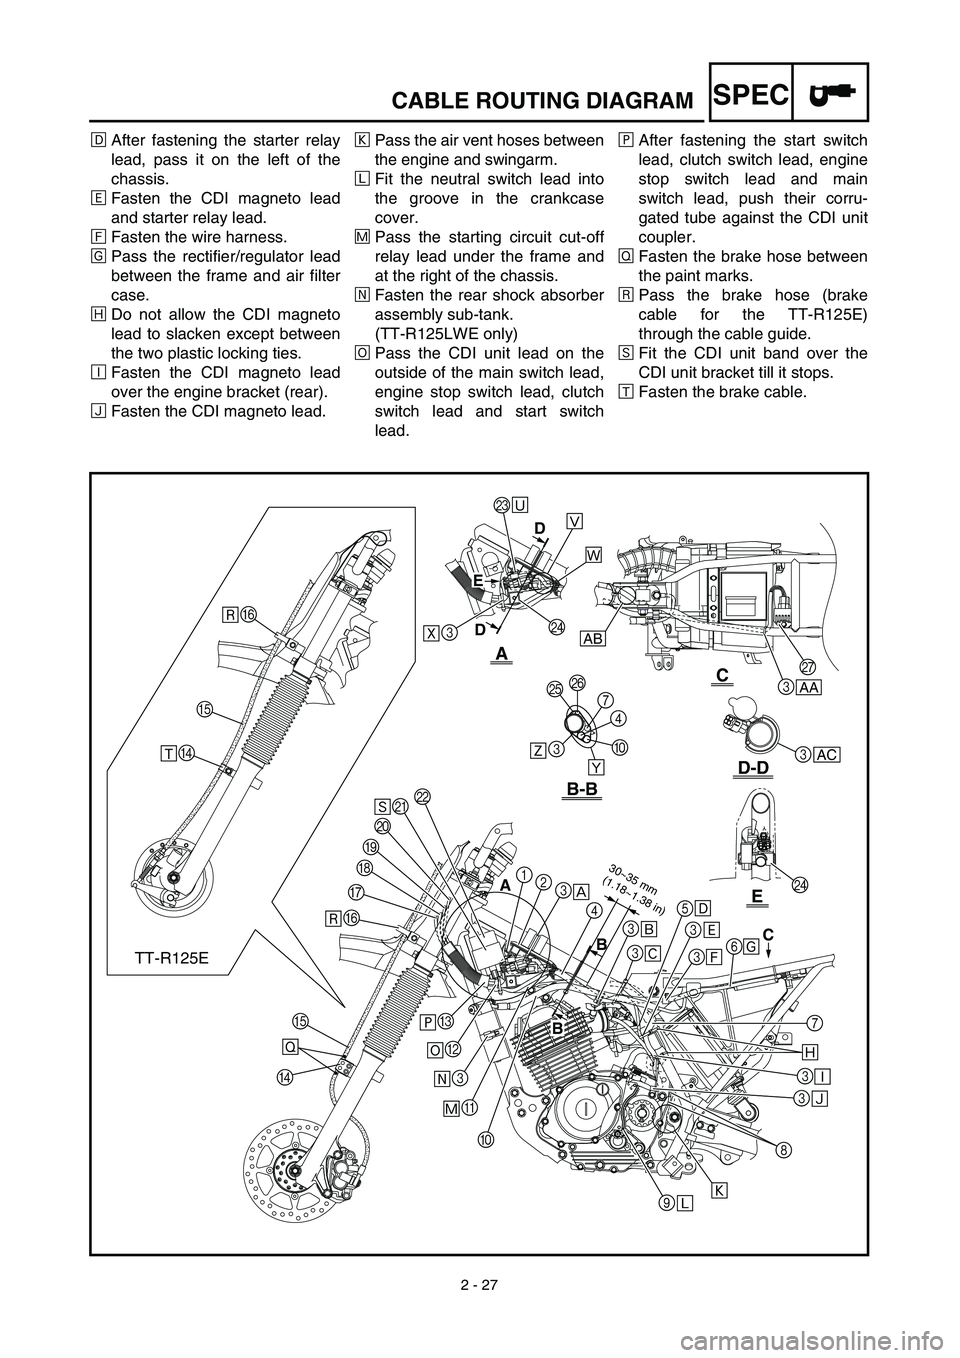 YAMAHA TTR125 2003  Owners Manual  
2 - 27
SPEC
 
CABLE ROUTING DIAGRAM 
Î 
After fastening the starter relay
lead, pass it on the left of the
chassis. 
‰ 
Fasten the CDI magneto lead
and starter relay lead. 
Ï 
Fasten the wire ha